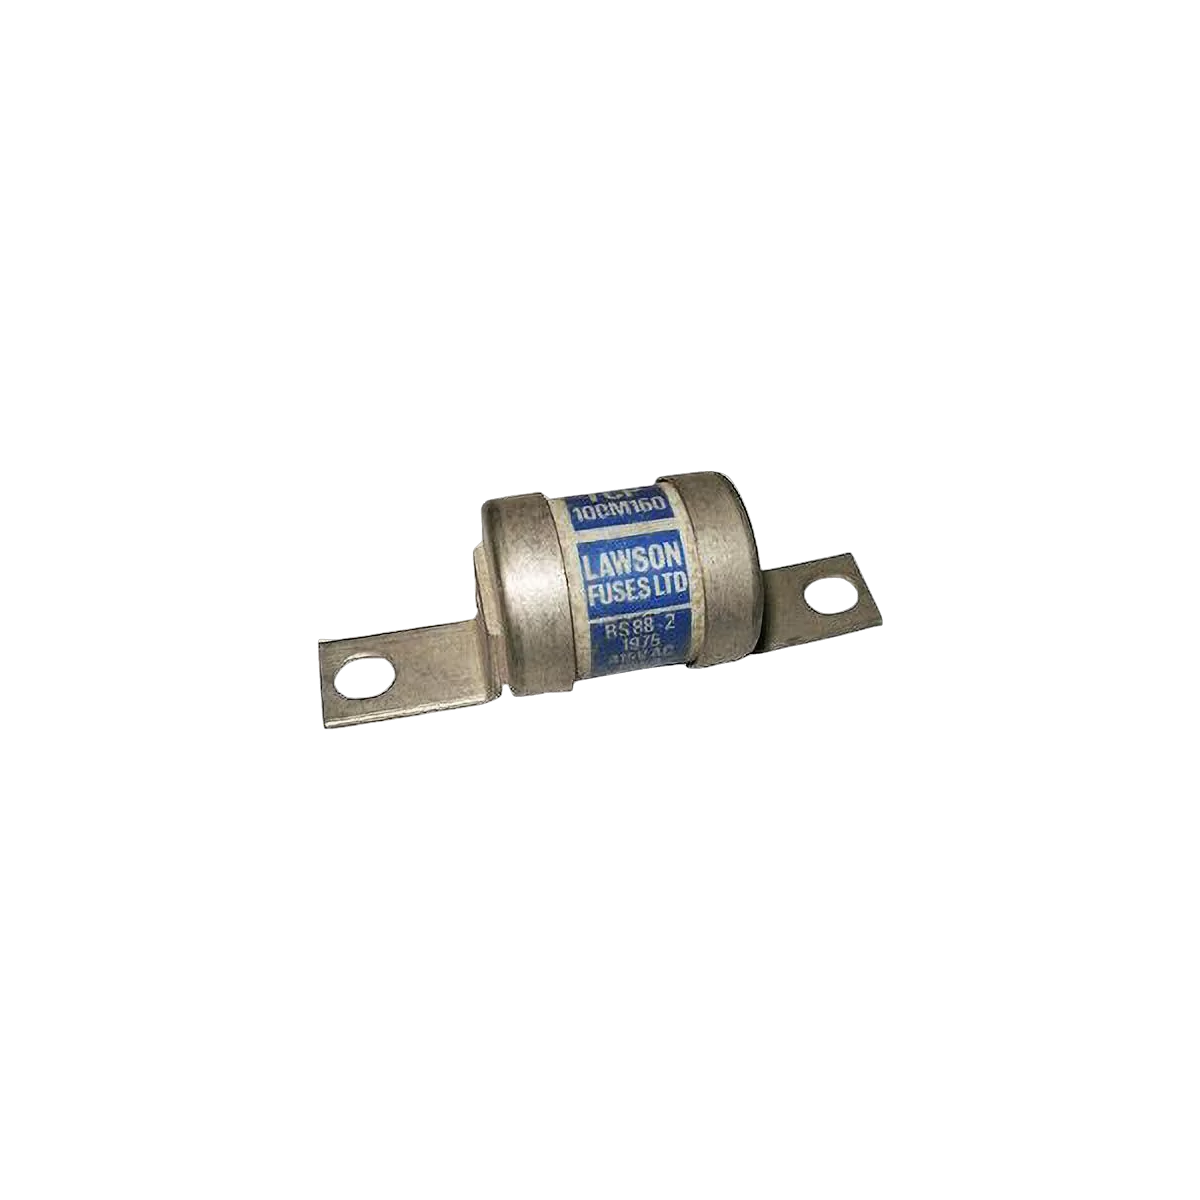 Lawson TCP100M125 Industrial & Compact Dimension Fuses